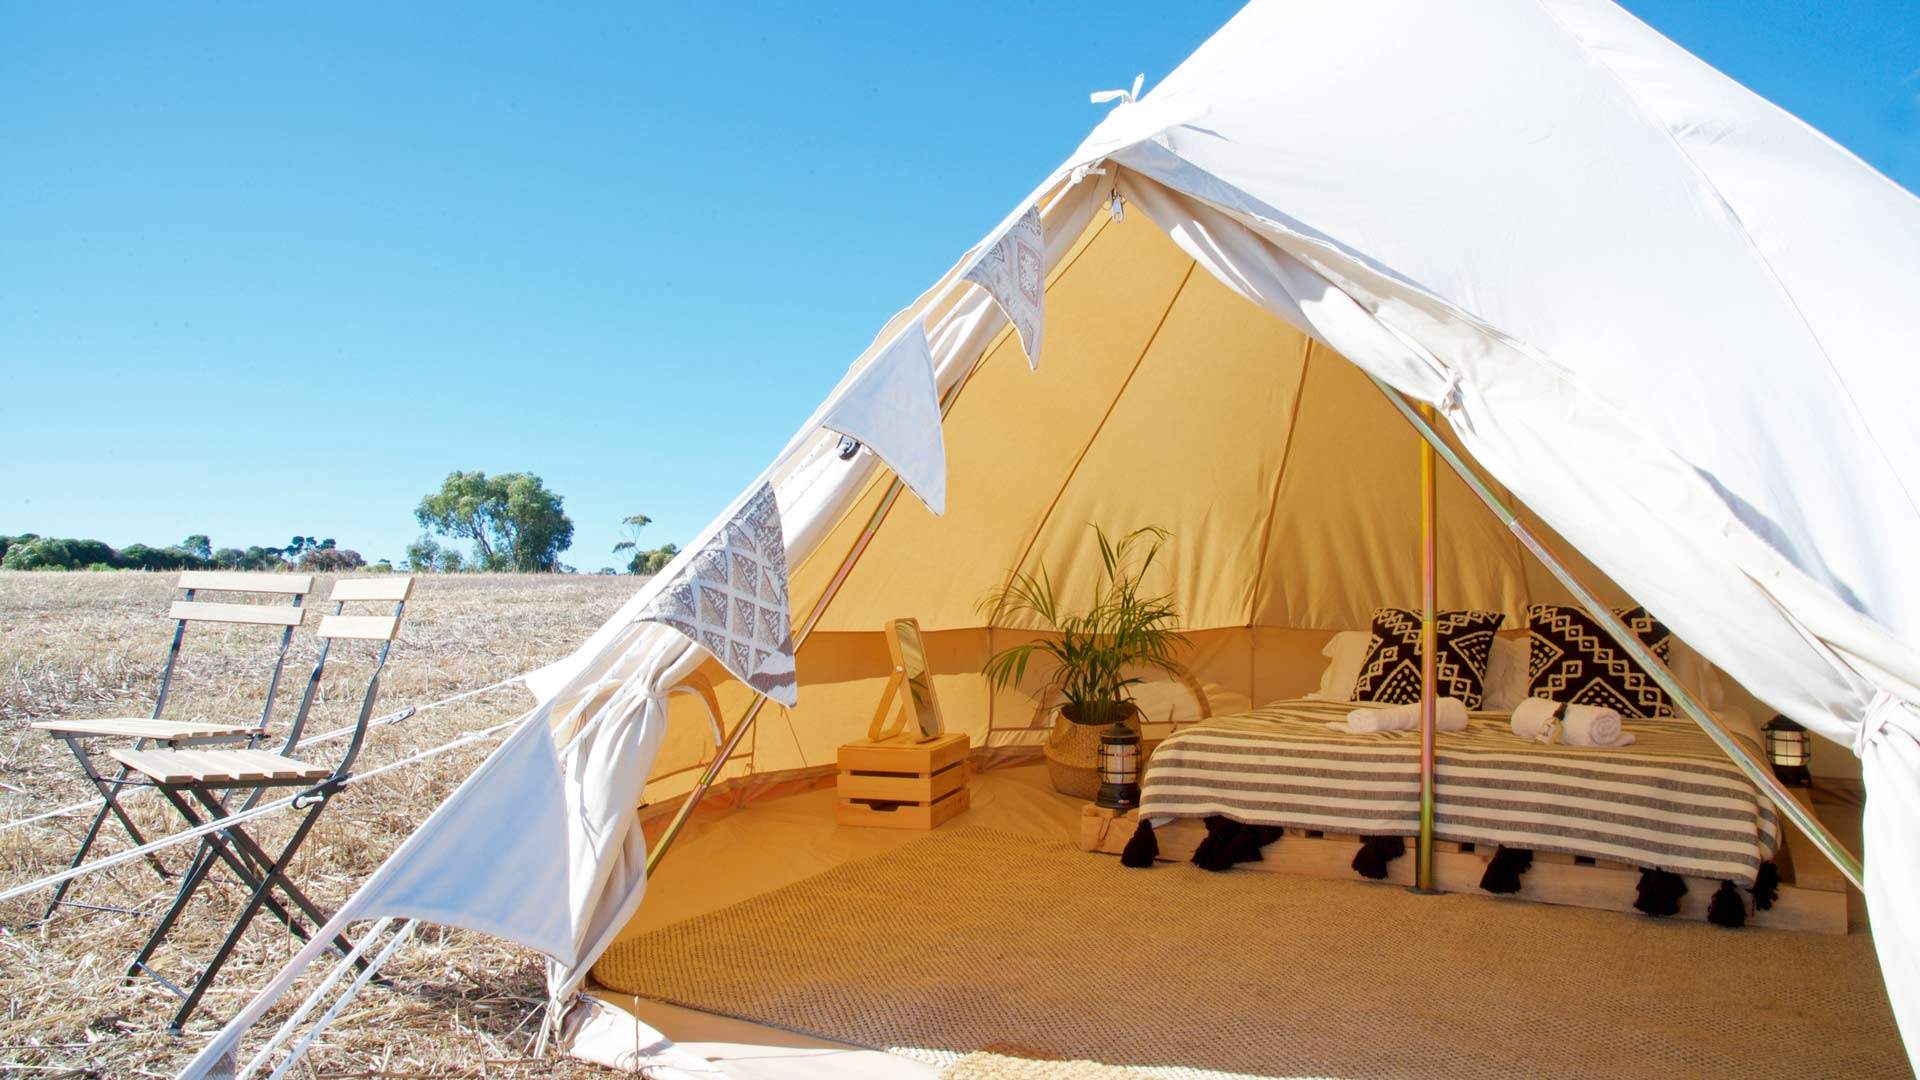 Terindah Estate Winery's Glamping Retreat with Its Own Private Beach Is Back for Summer